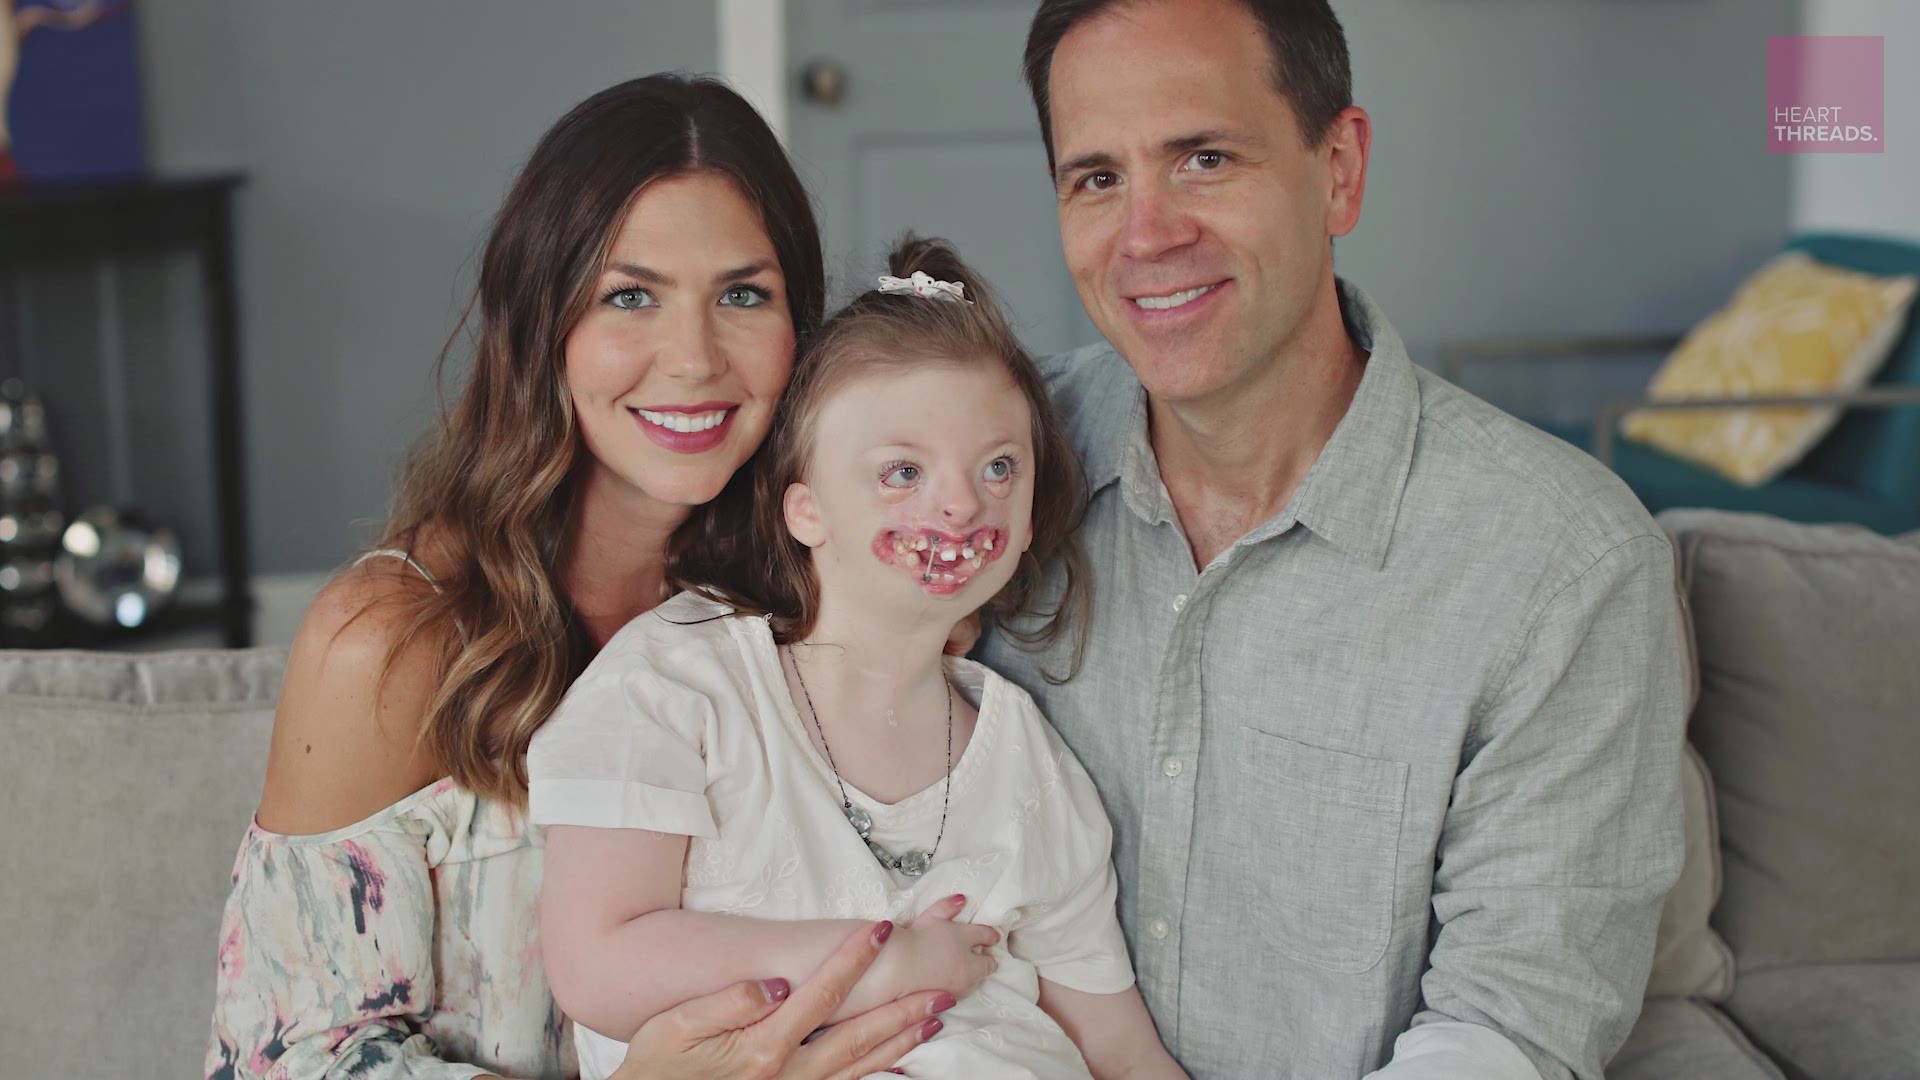 Natalie's daughter Sophia was born with severe facial deformities and disabilities. When Natalie would take her out or post photos online, the cruelty would be too much to bear. But love for her daughter trumped fear, so she stepped out and became a fierc